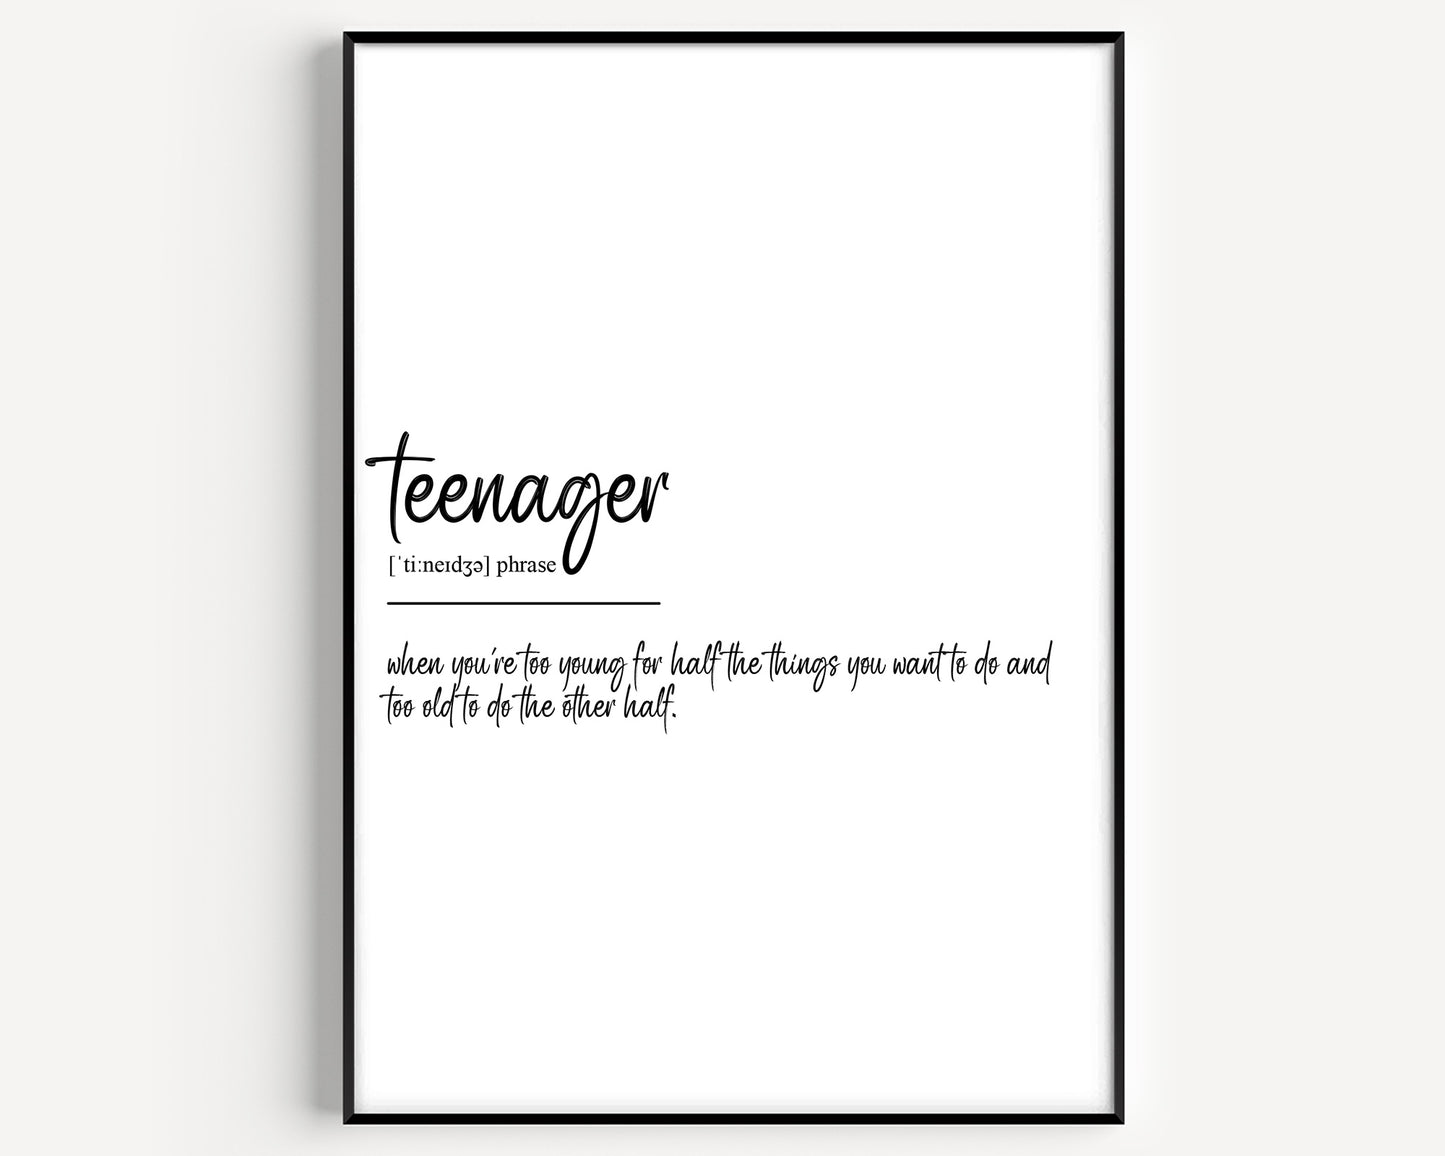 Teenager Definition Print - Magic Posters